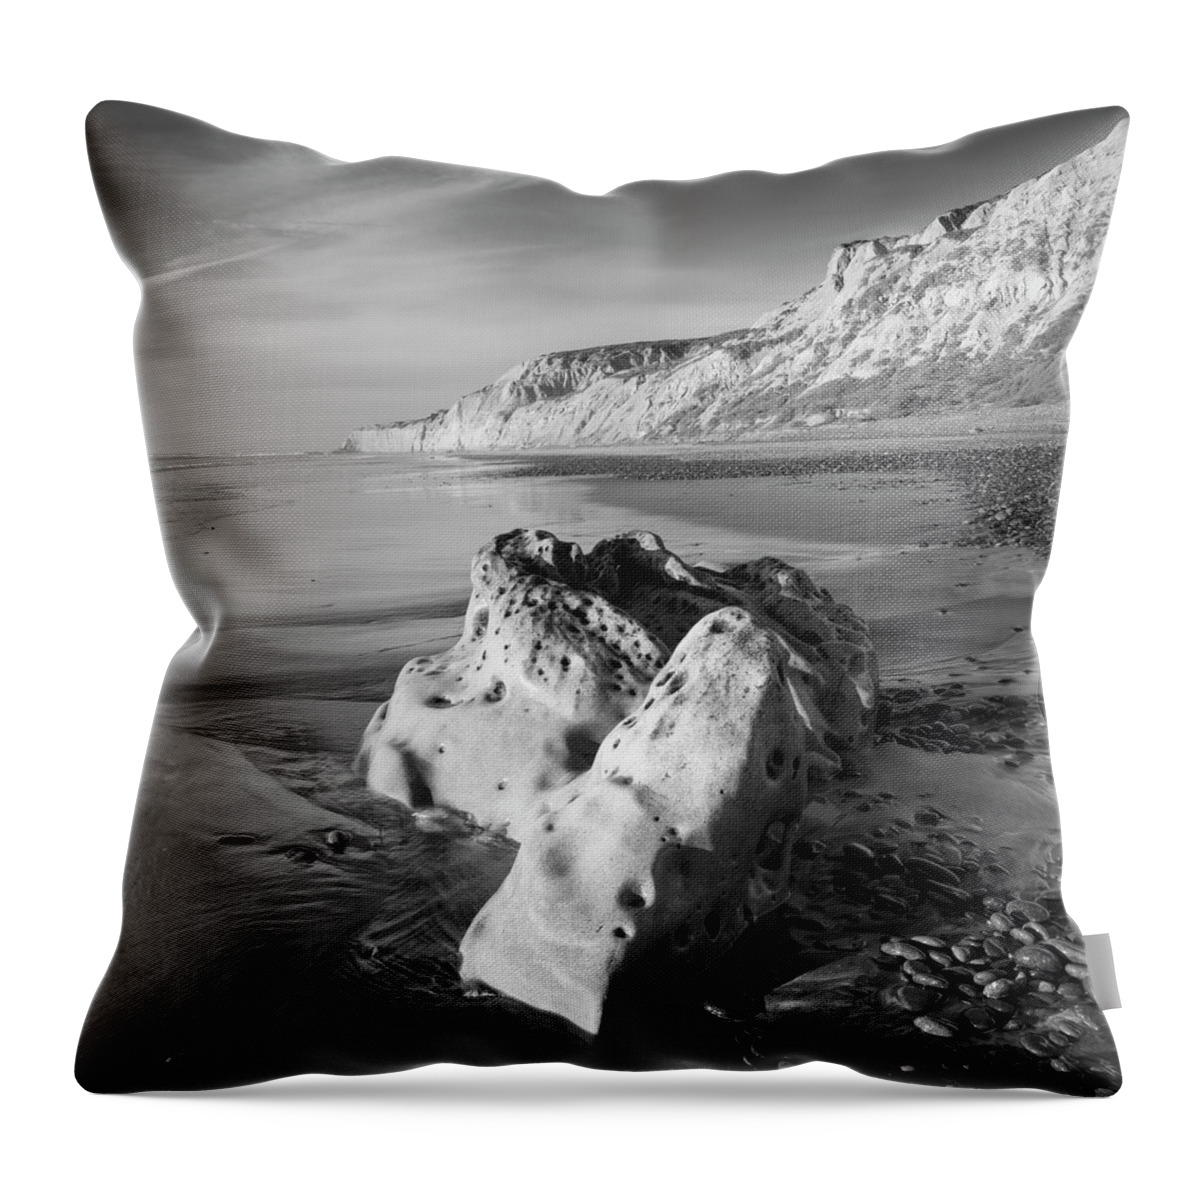 San Diego Throw Pillow featuring the photograph Torrey Pines Monochrome Beach by William Dunigan